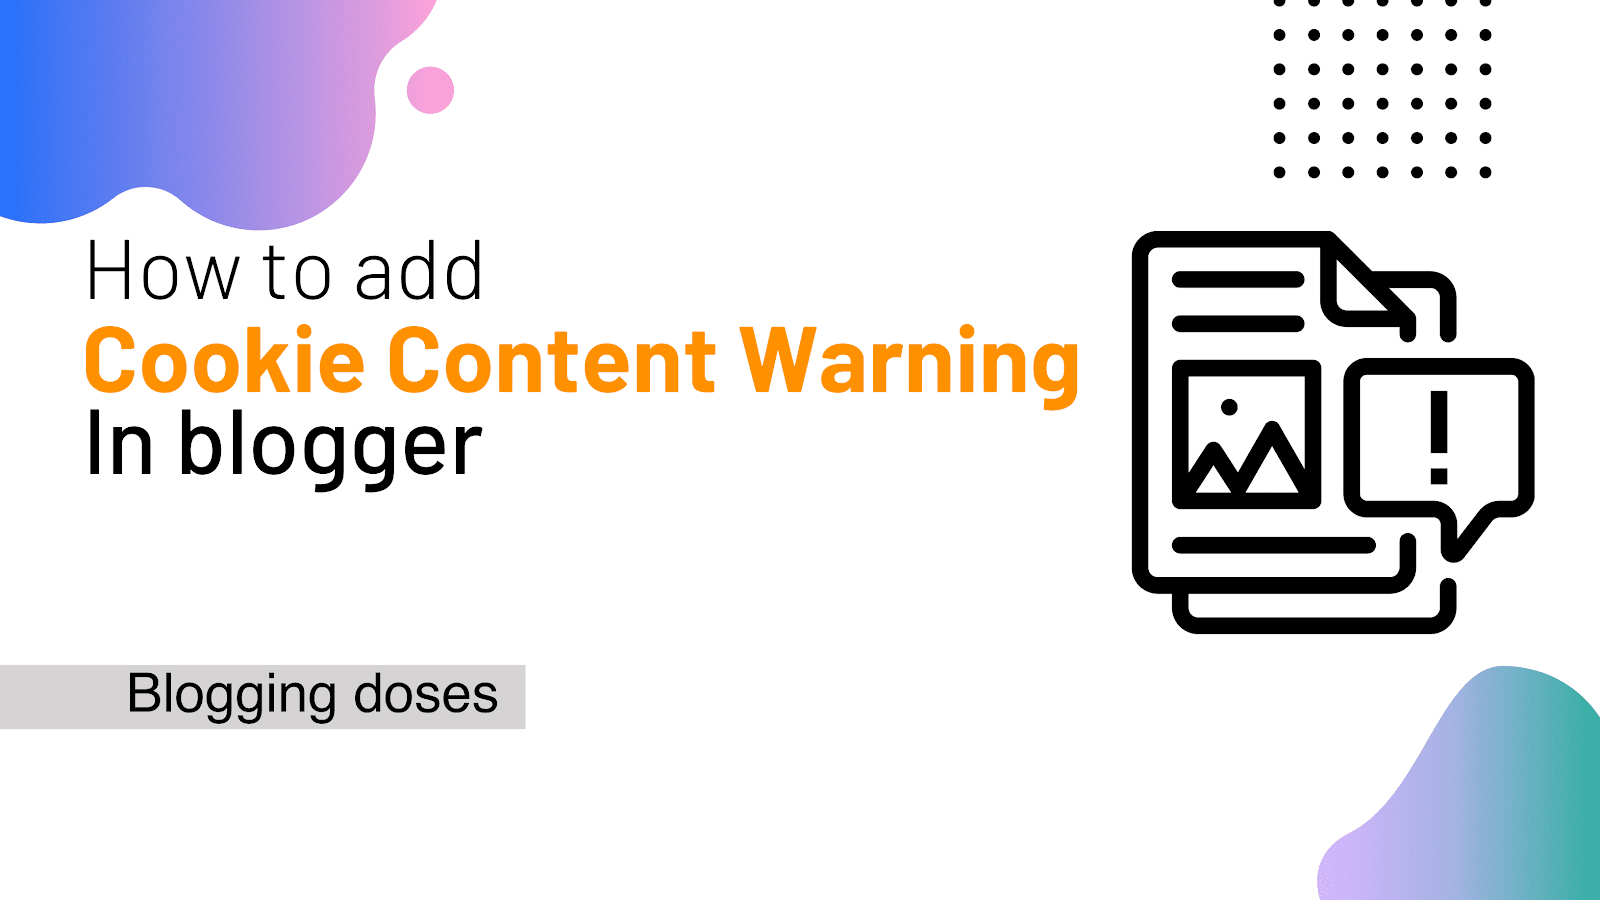 How To Add Cookie Consent Warning To Your Blogger Blog?